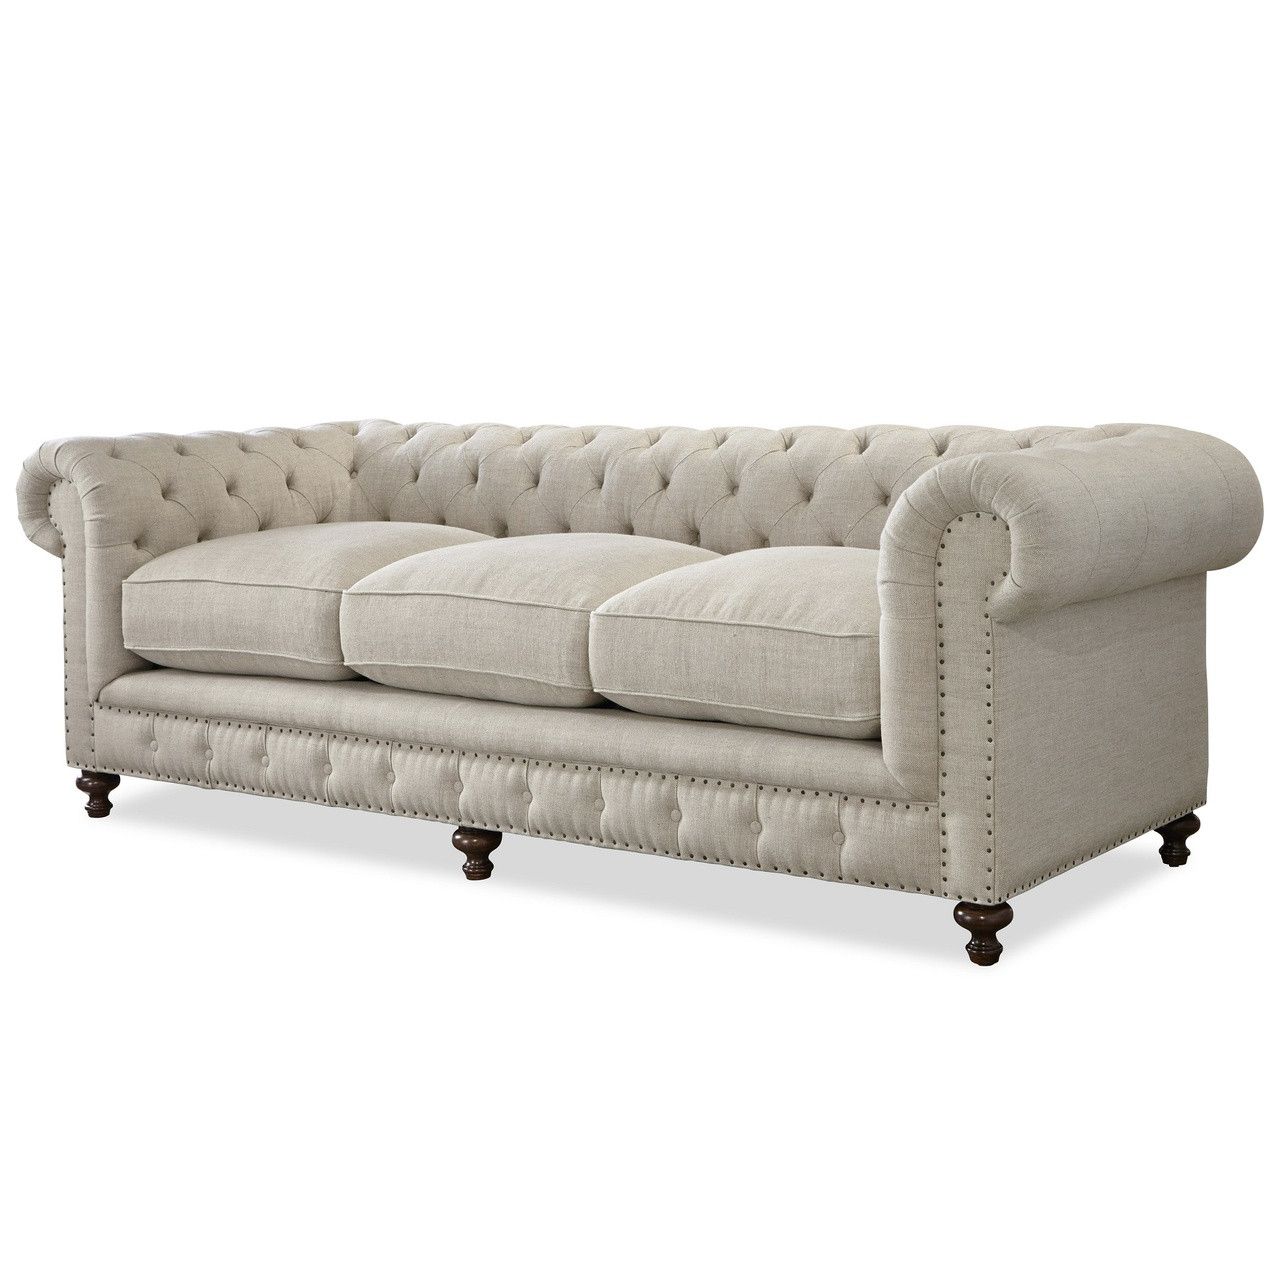 Berkeley 98" Tufted Linen Upholstered Chesterfield Sofa | Zin Home Intended For Tufted Upholstered Sofas (Gallery 1 of 20)